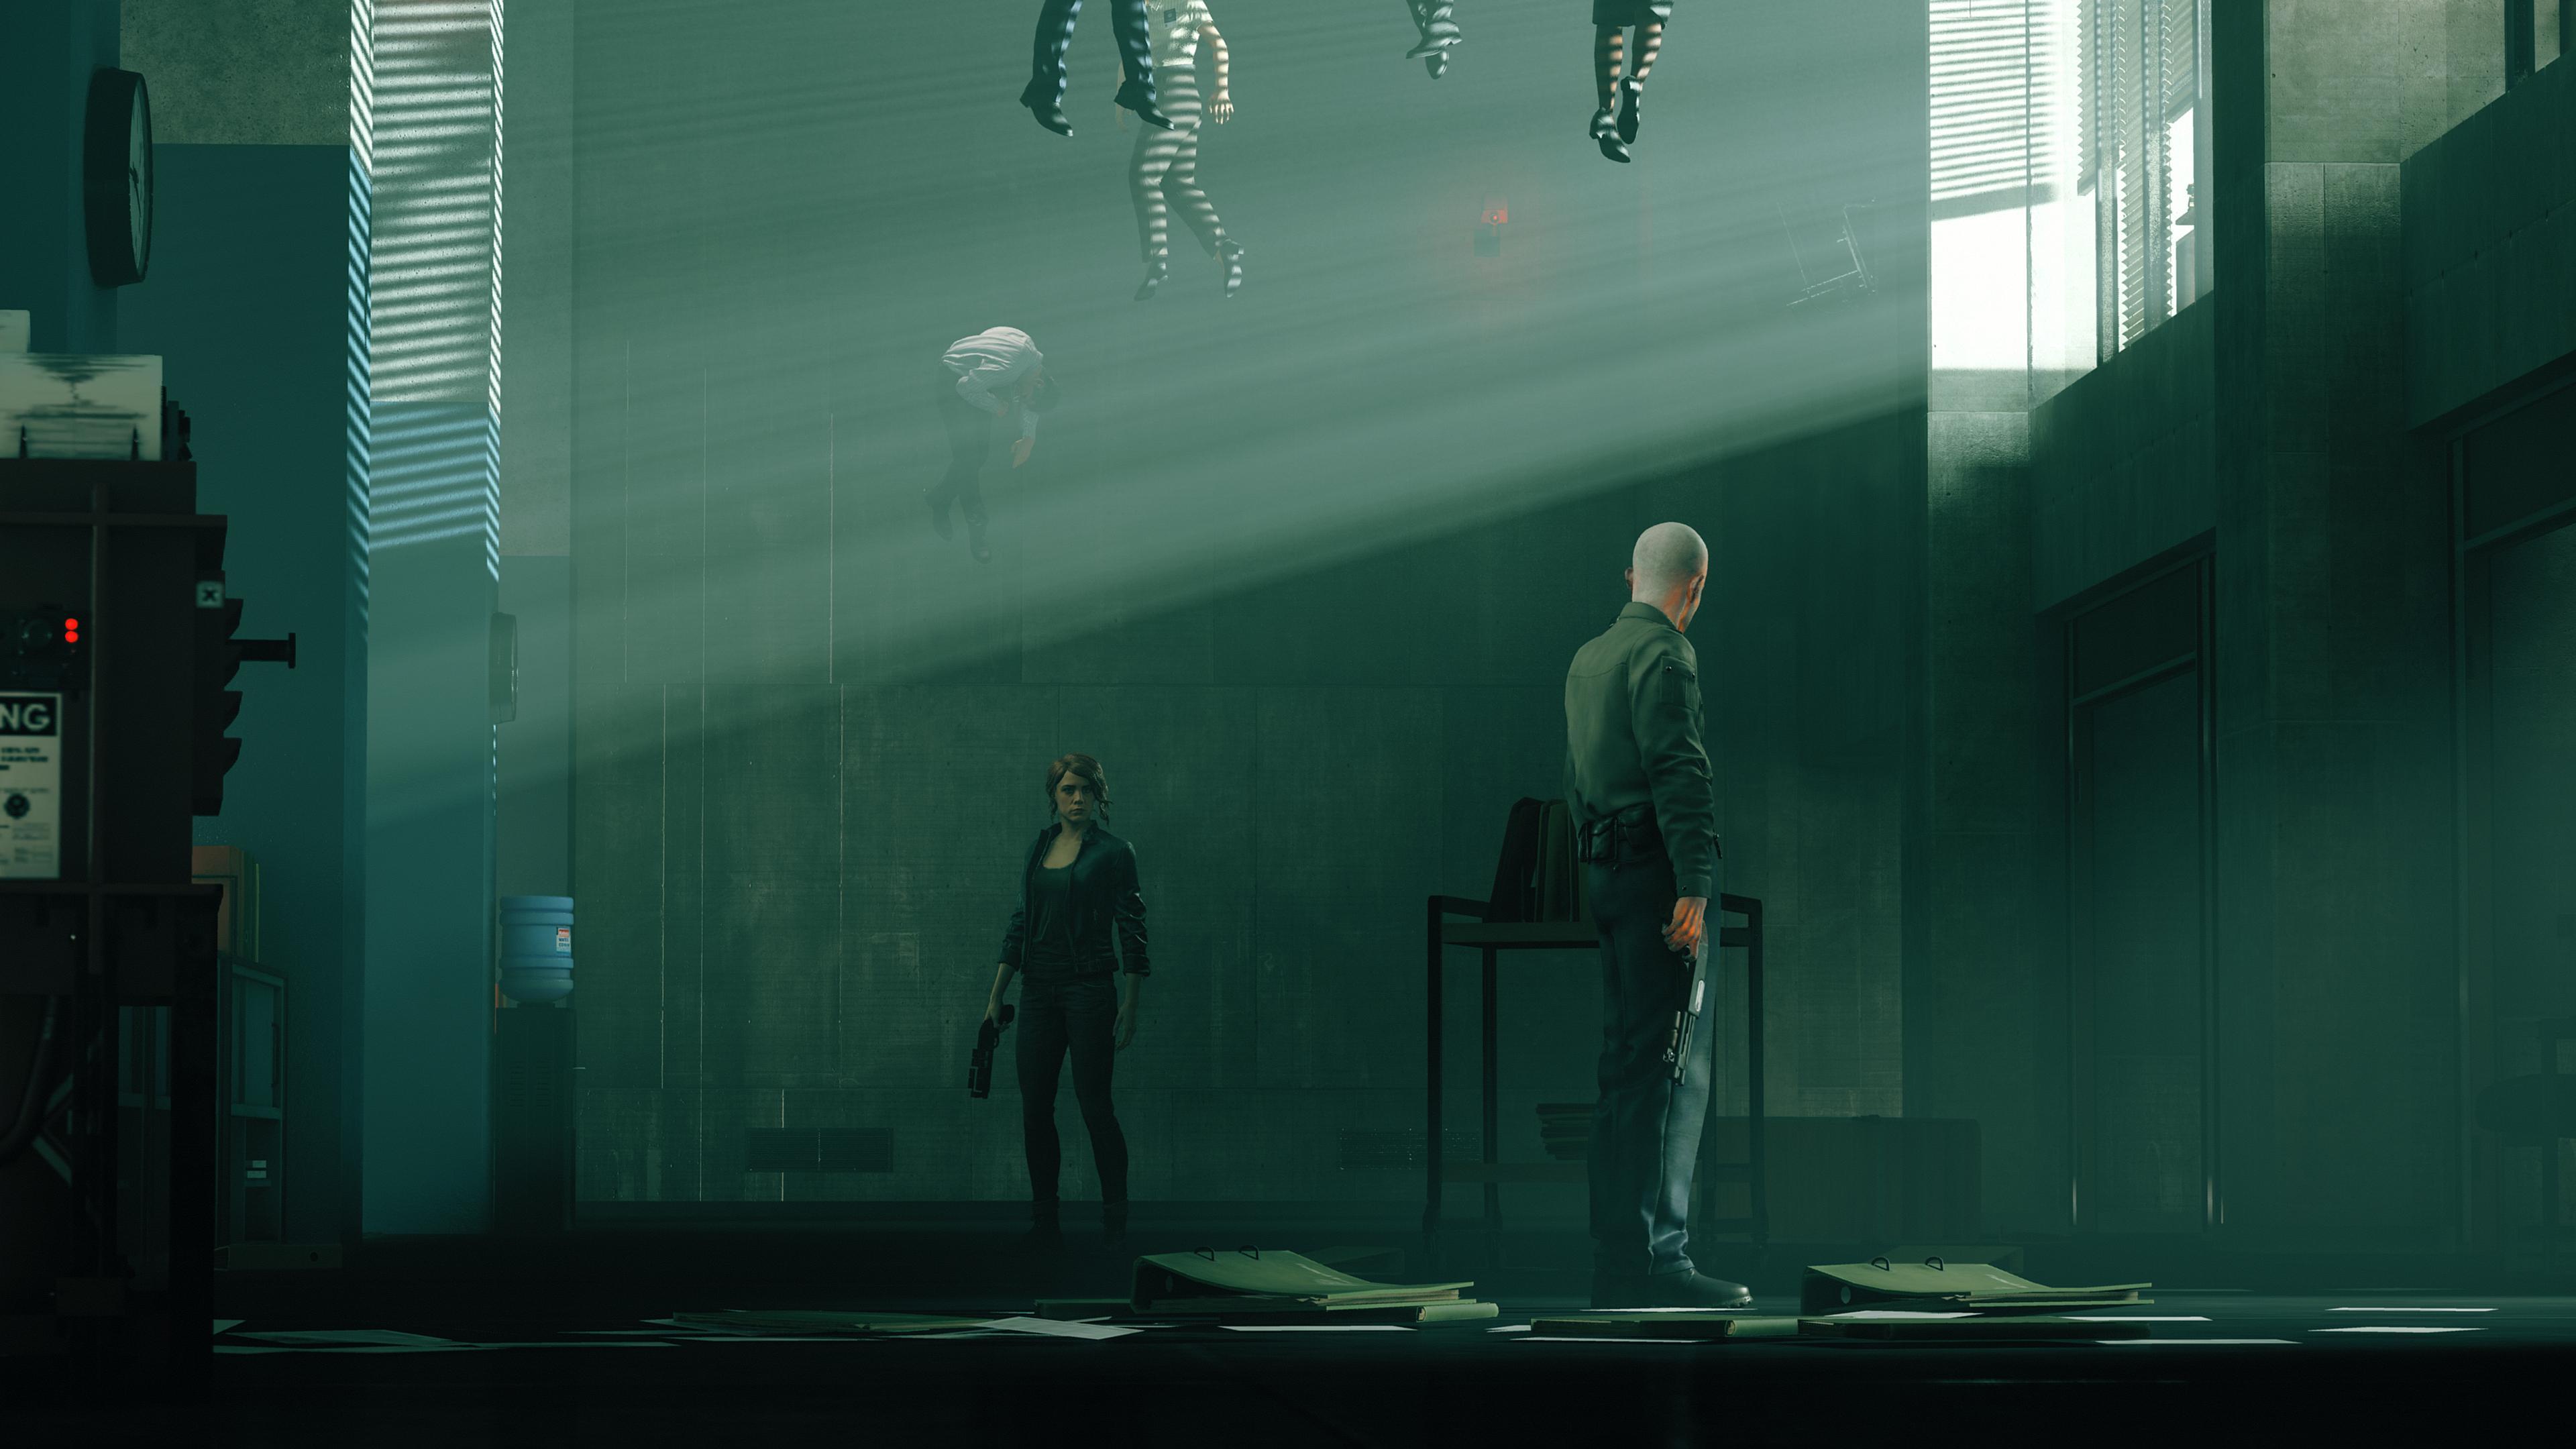 Sony debuts Remedy's new game, Control, at E3 2018